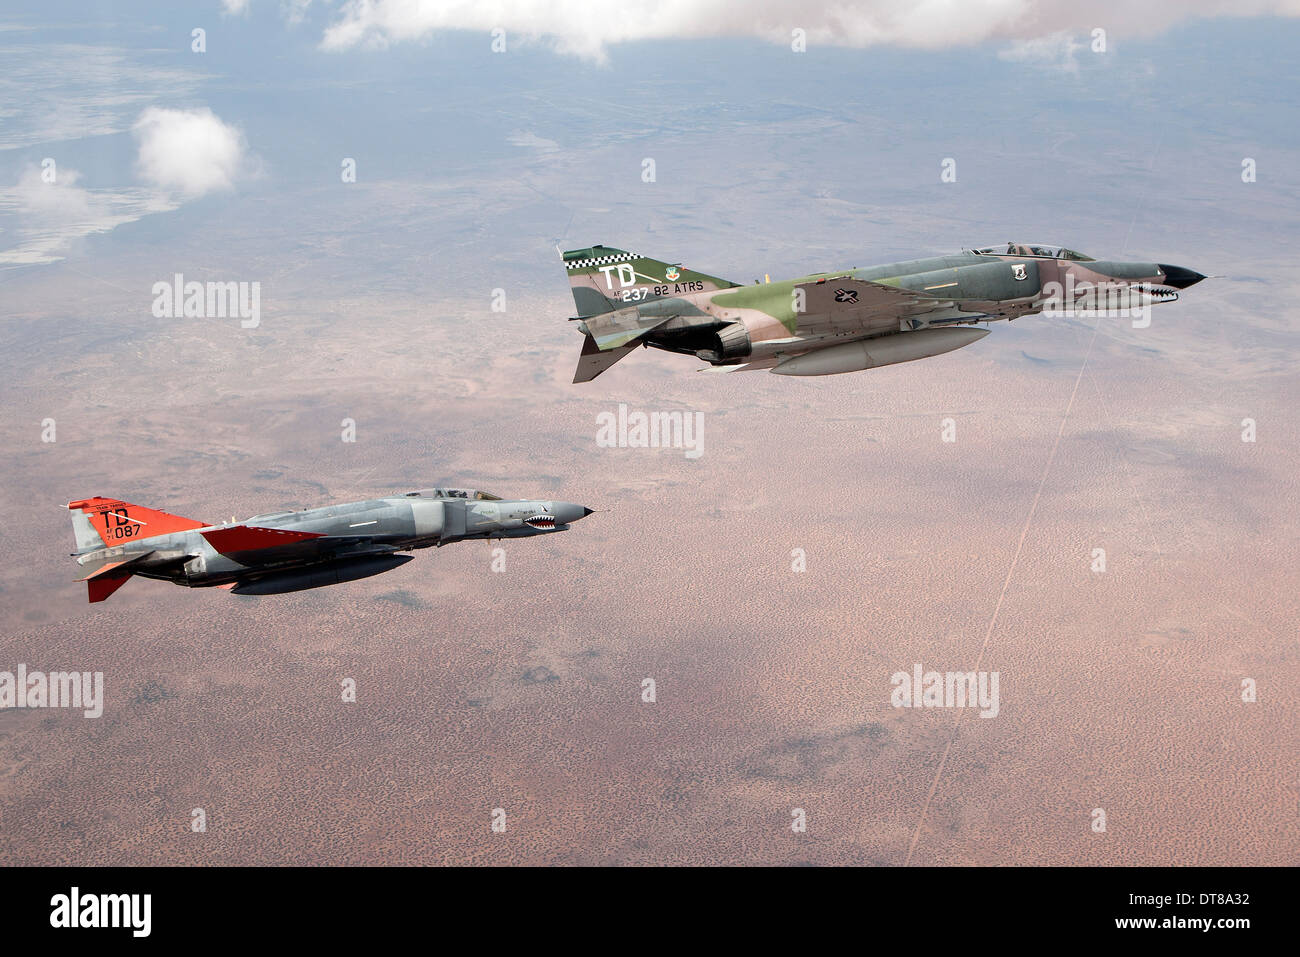 Two QF-4E Phantom II drones in formation over the New Mexico desert, south of Holloman Air Force Base. Stock Photo